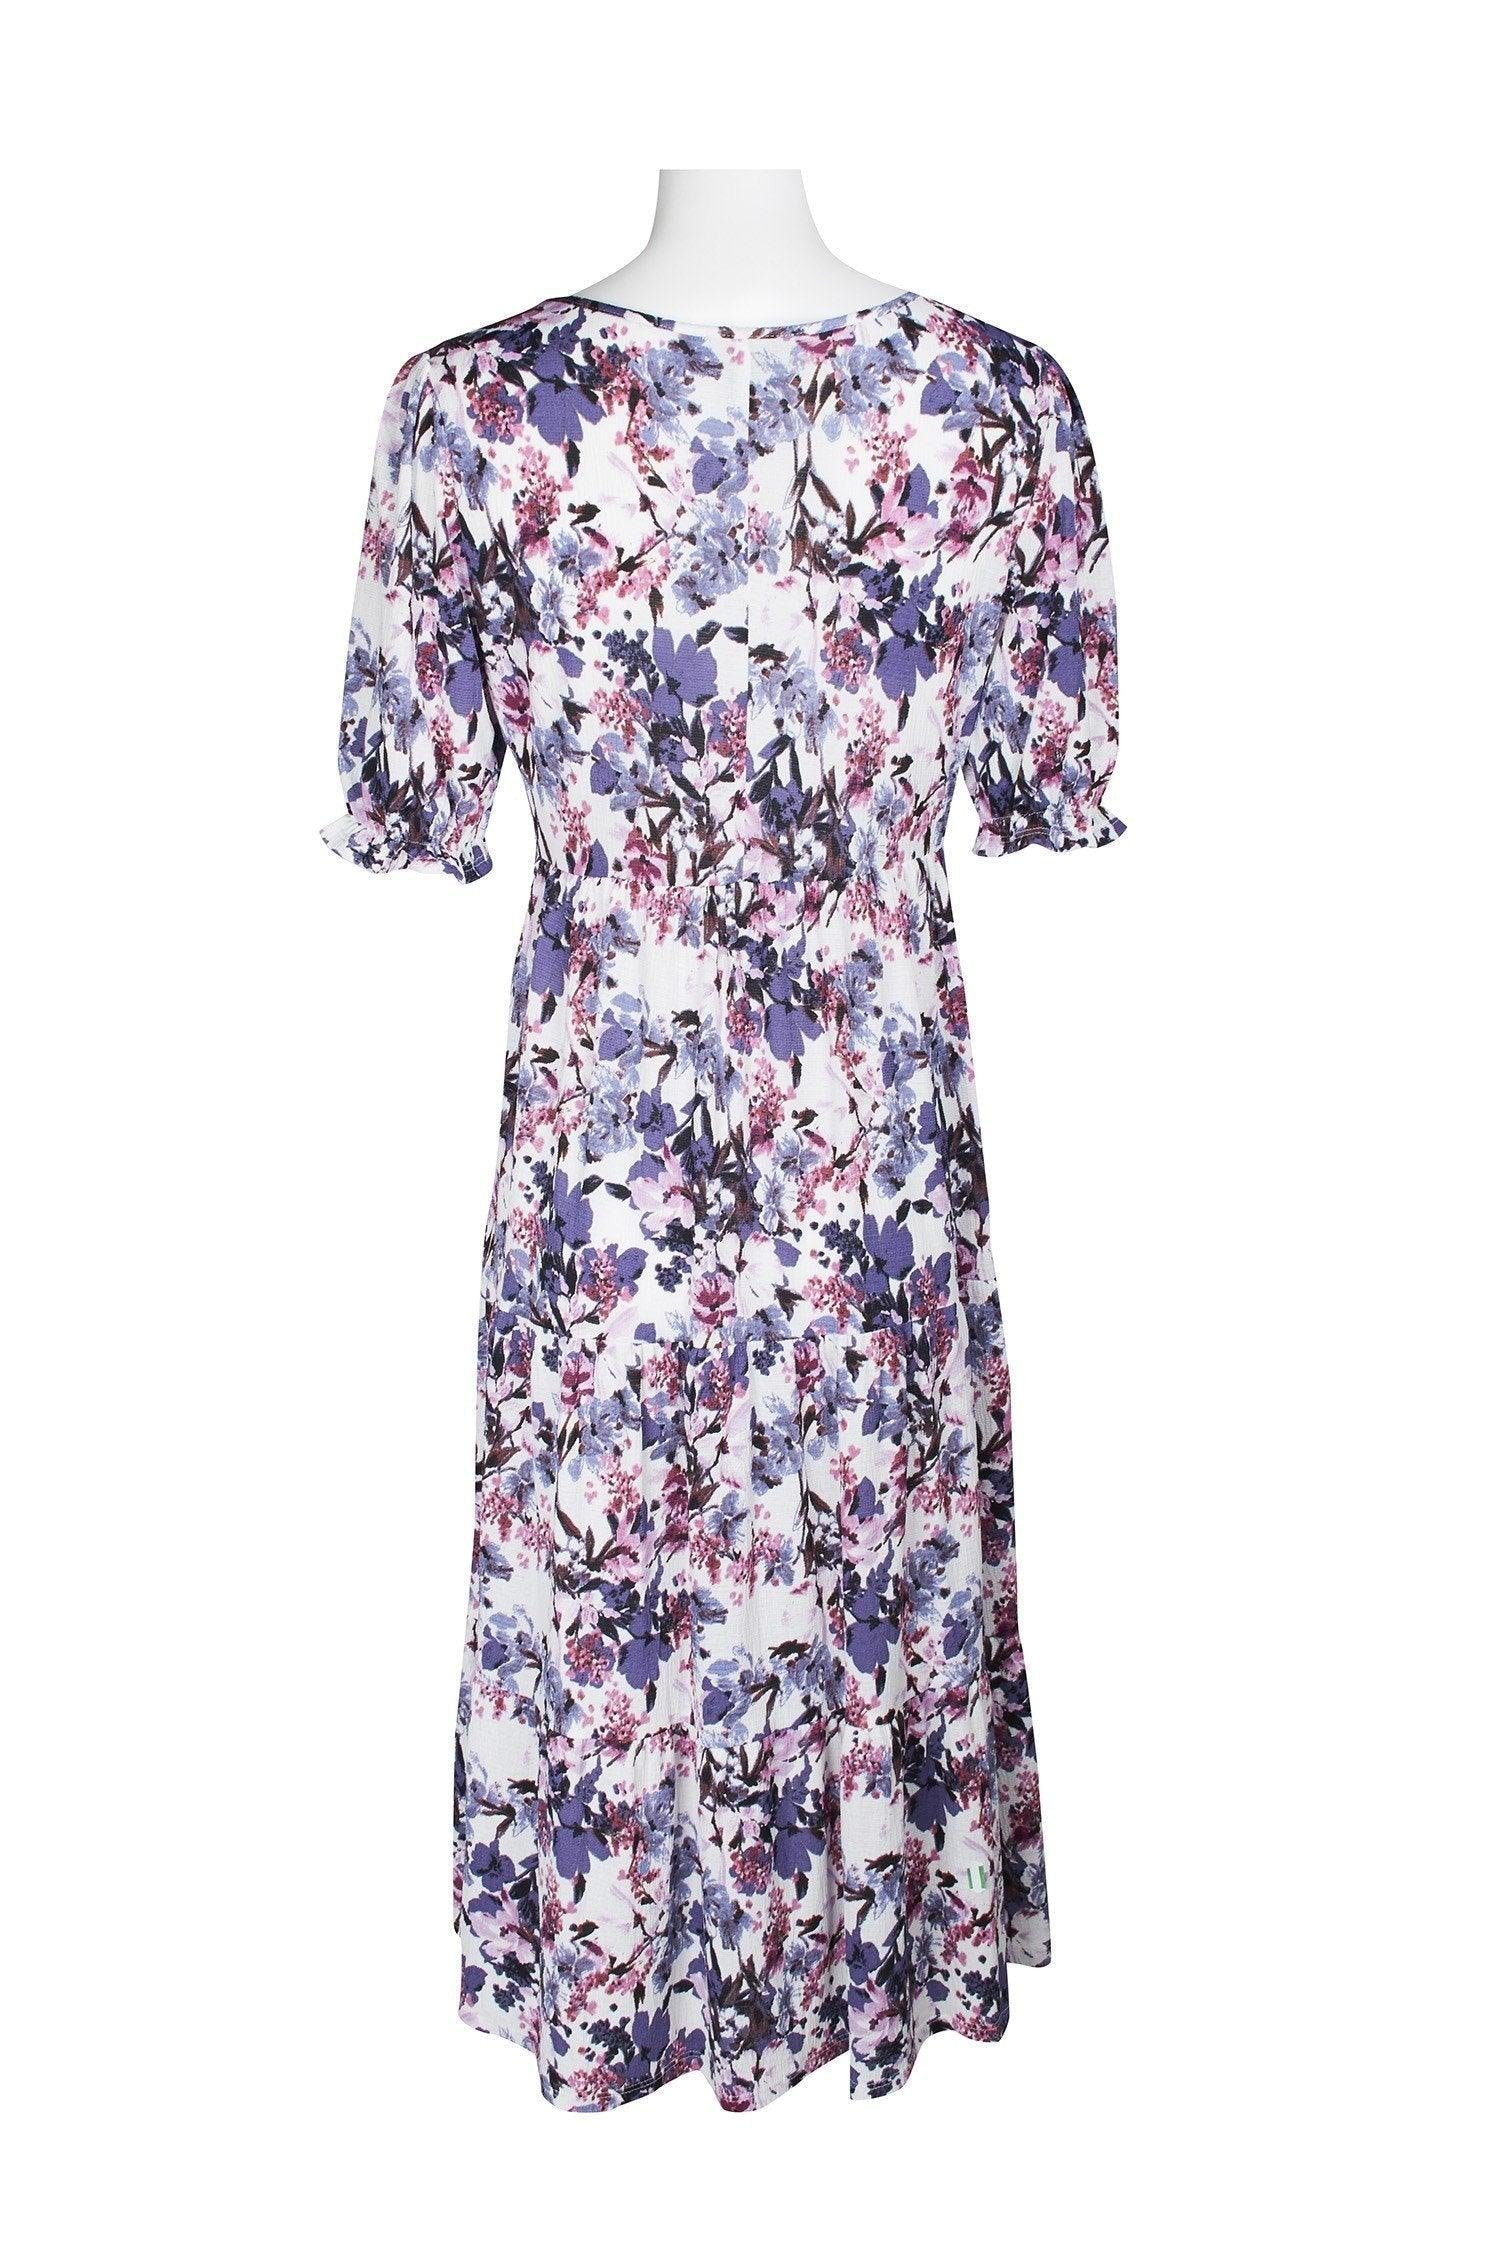 Connected Apparel Short Sleeve Floral Print Dress Sale - The Dress Outlet